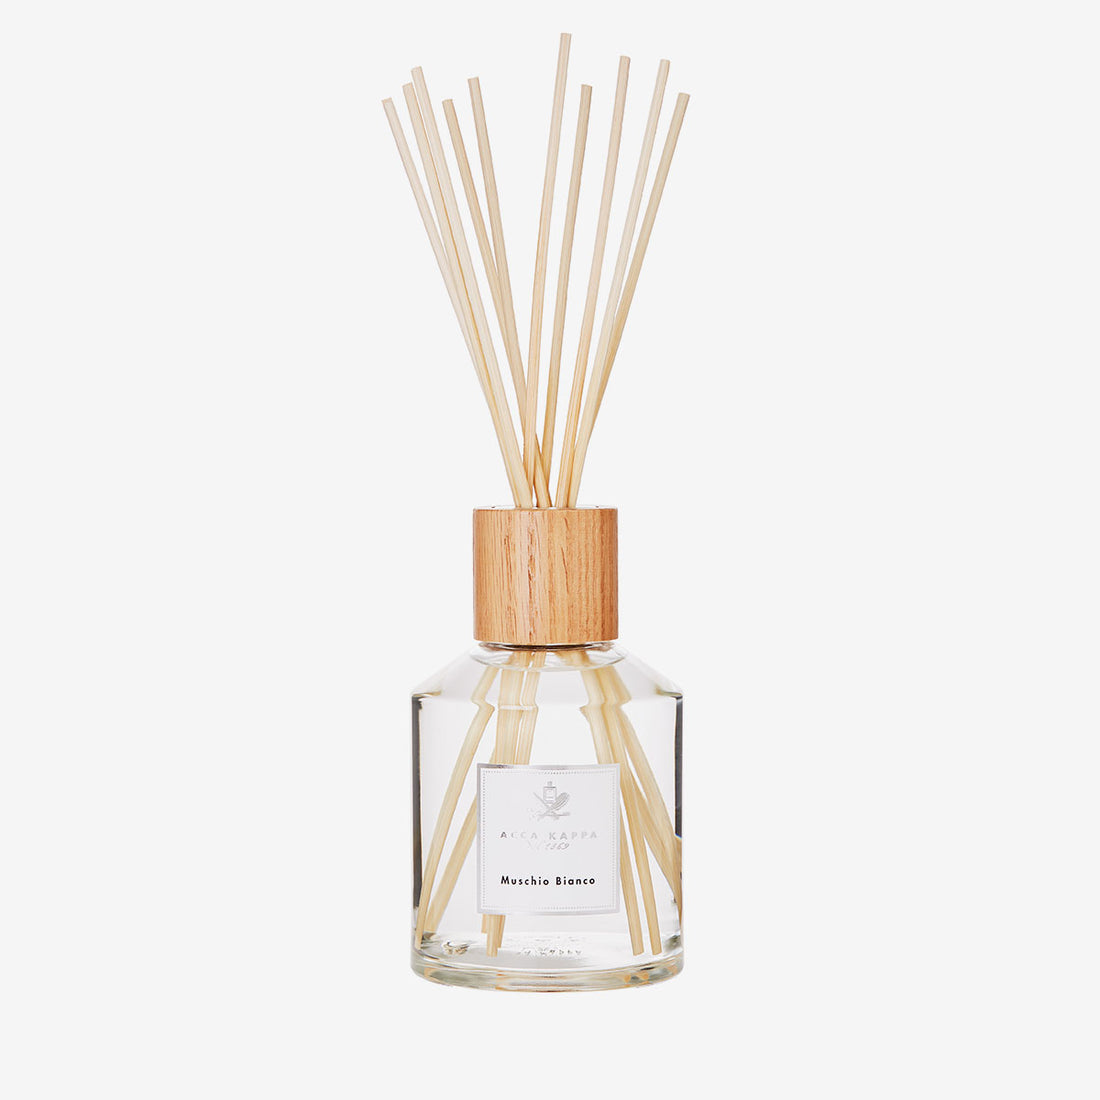 ACCA KAPPA White Moss Home Diffuser with Sticks, 250ml